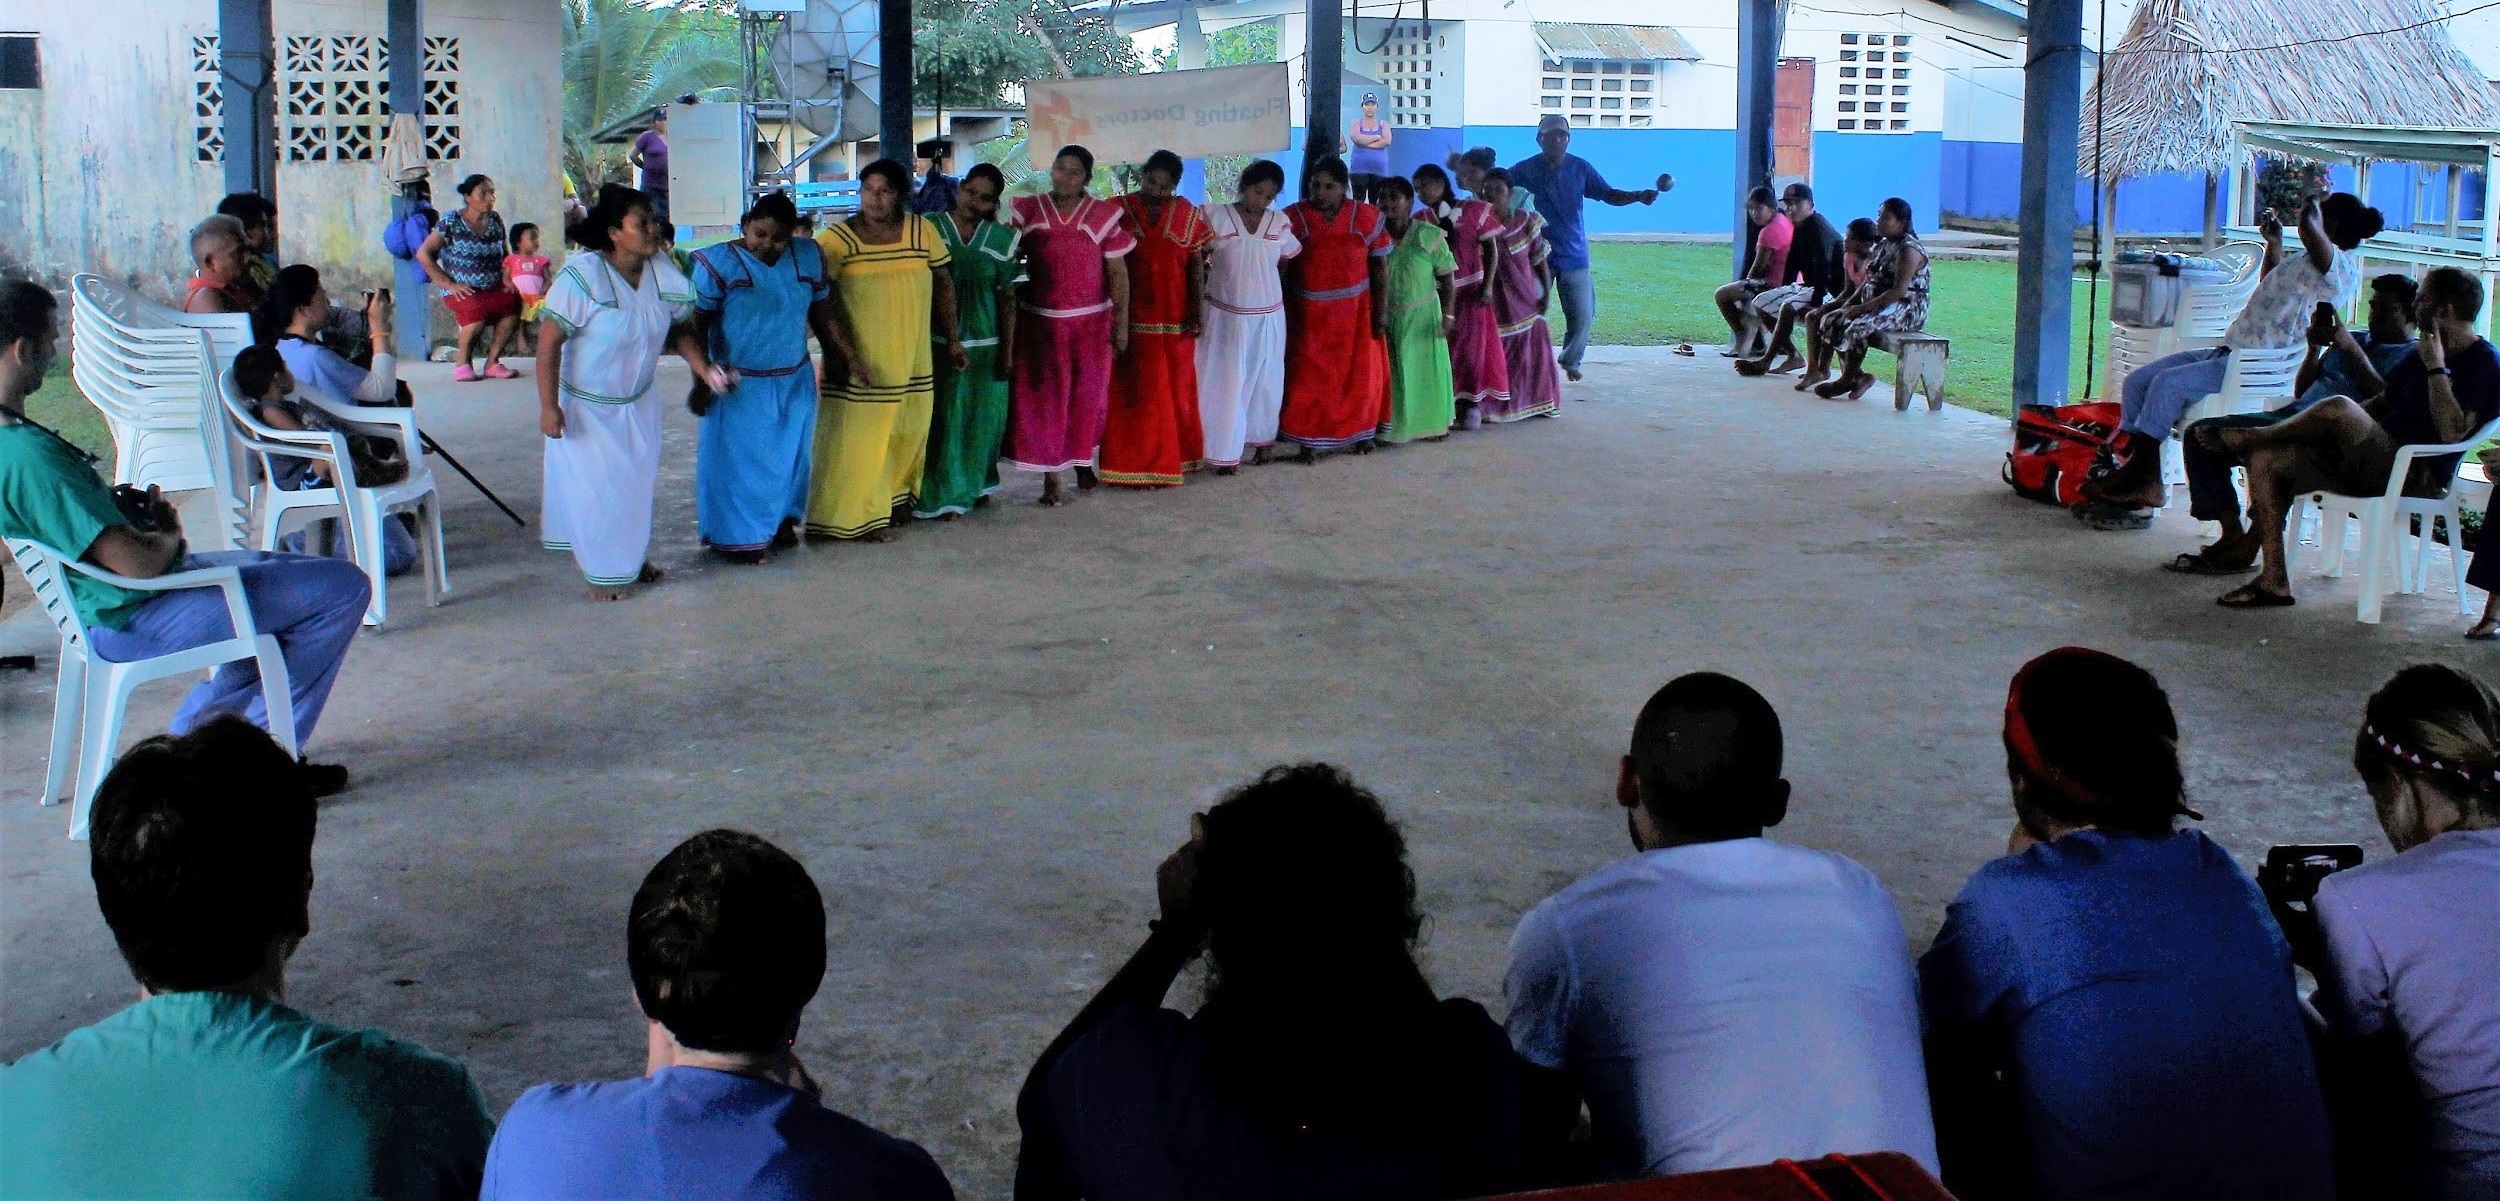 A group of 11 women of the Ngabe community stand in a row under a pavilion. They are wearing colorful dresses and performing a dance of appreciation for the Penn State College of Medicine students. Students and natives sit in the foreground watching. Two rows of people sit on either side watching.